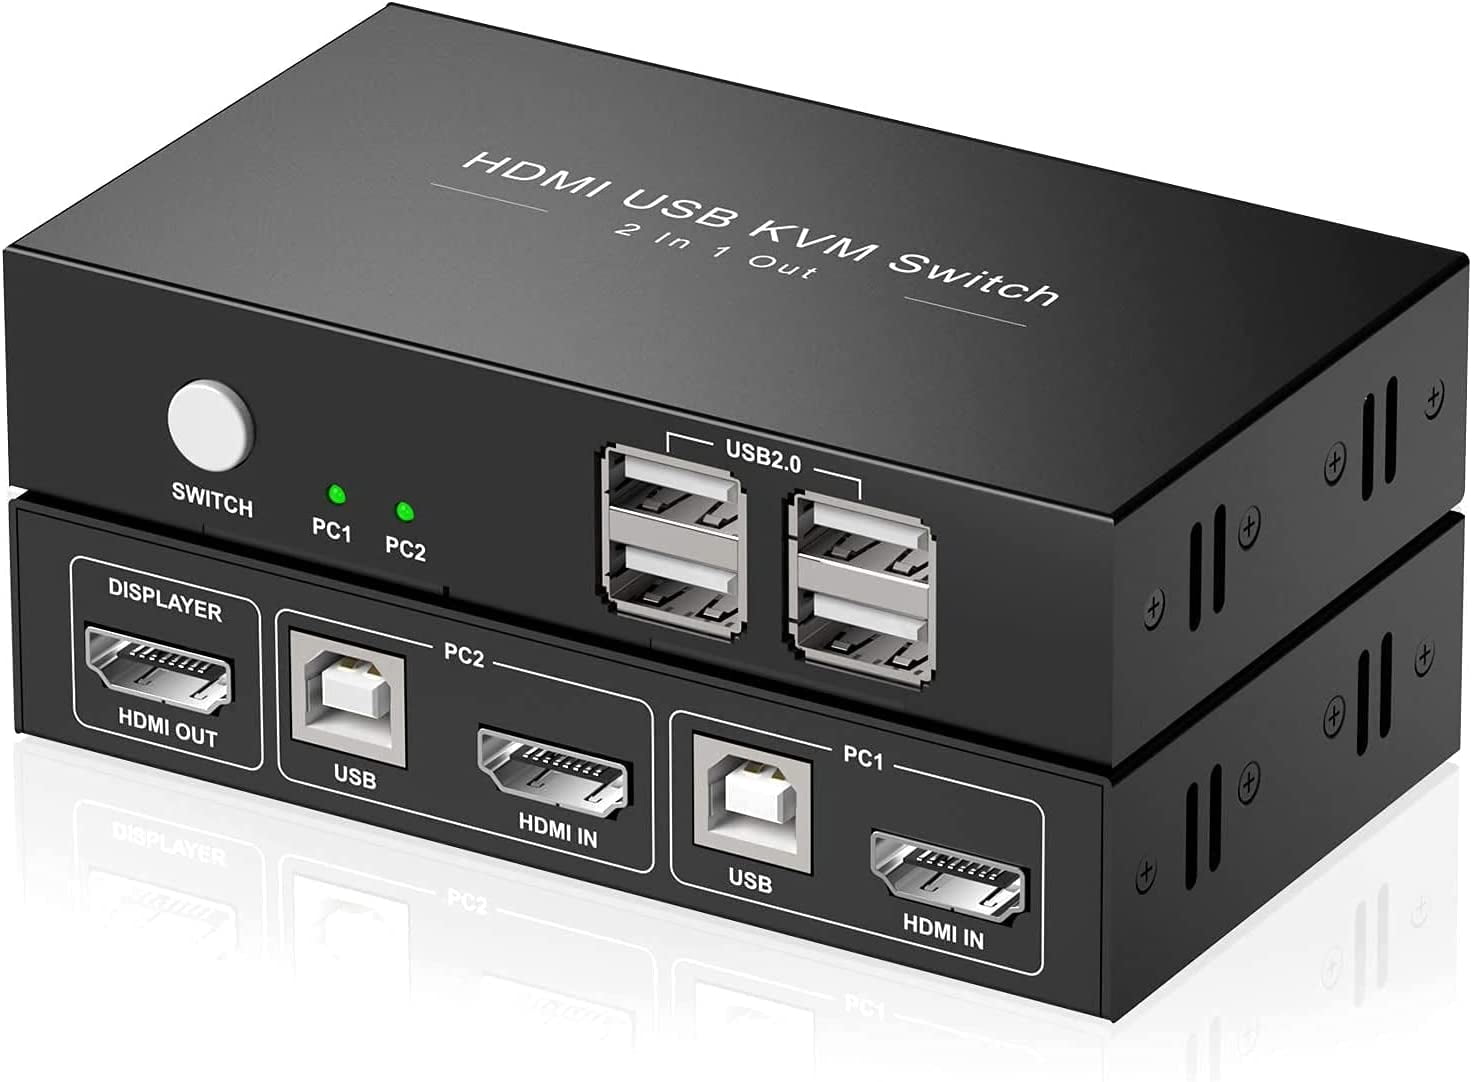 KVM Switch HDMI Port Box, with 4 USB 2.0 Share 2 Computers, UHD 4Kx2K@30Hz, Support Keyboard and Mouse, Powered by USB, with HDMI and USB Cables Walmart.com